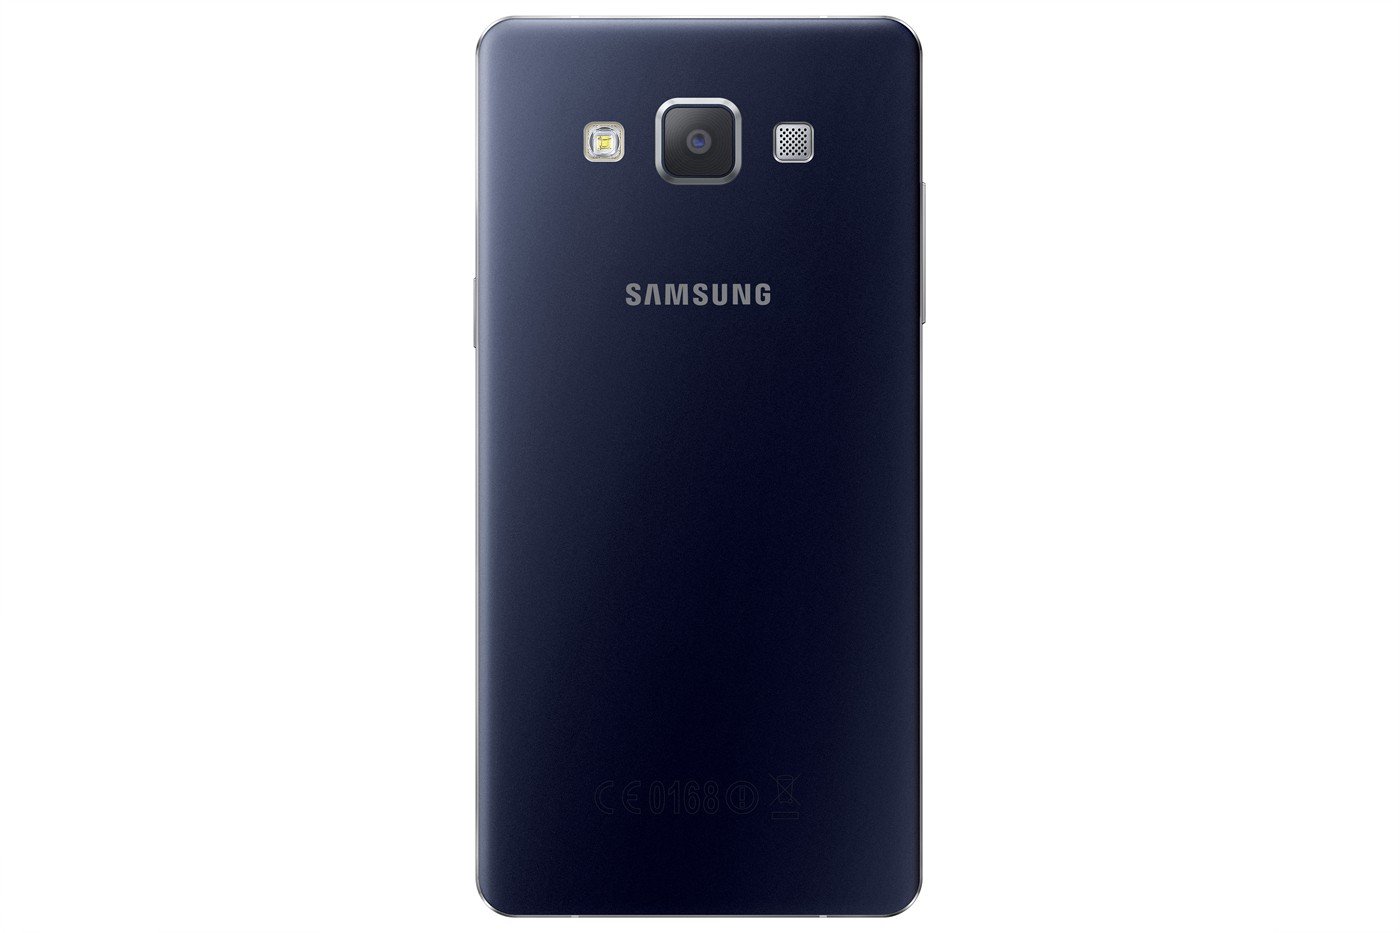 Samsung Galaxy A7 specs, review, release date - PhonesData